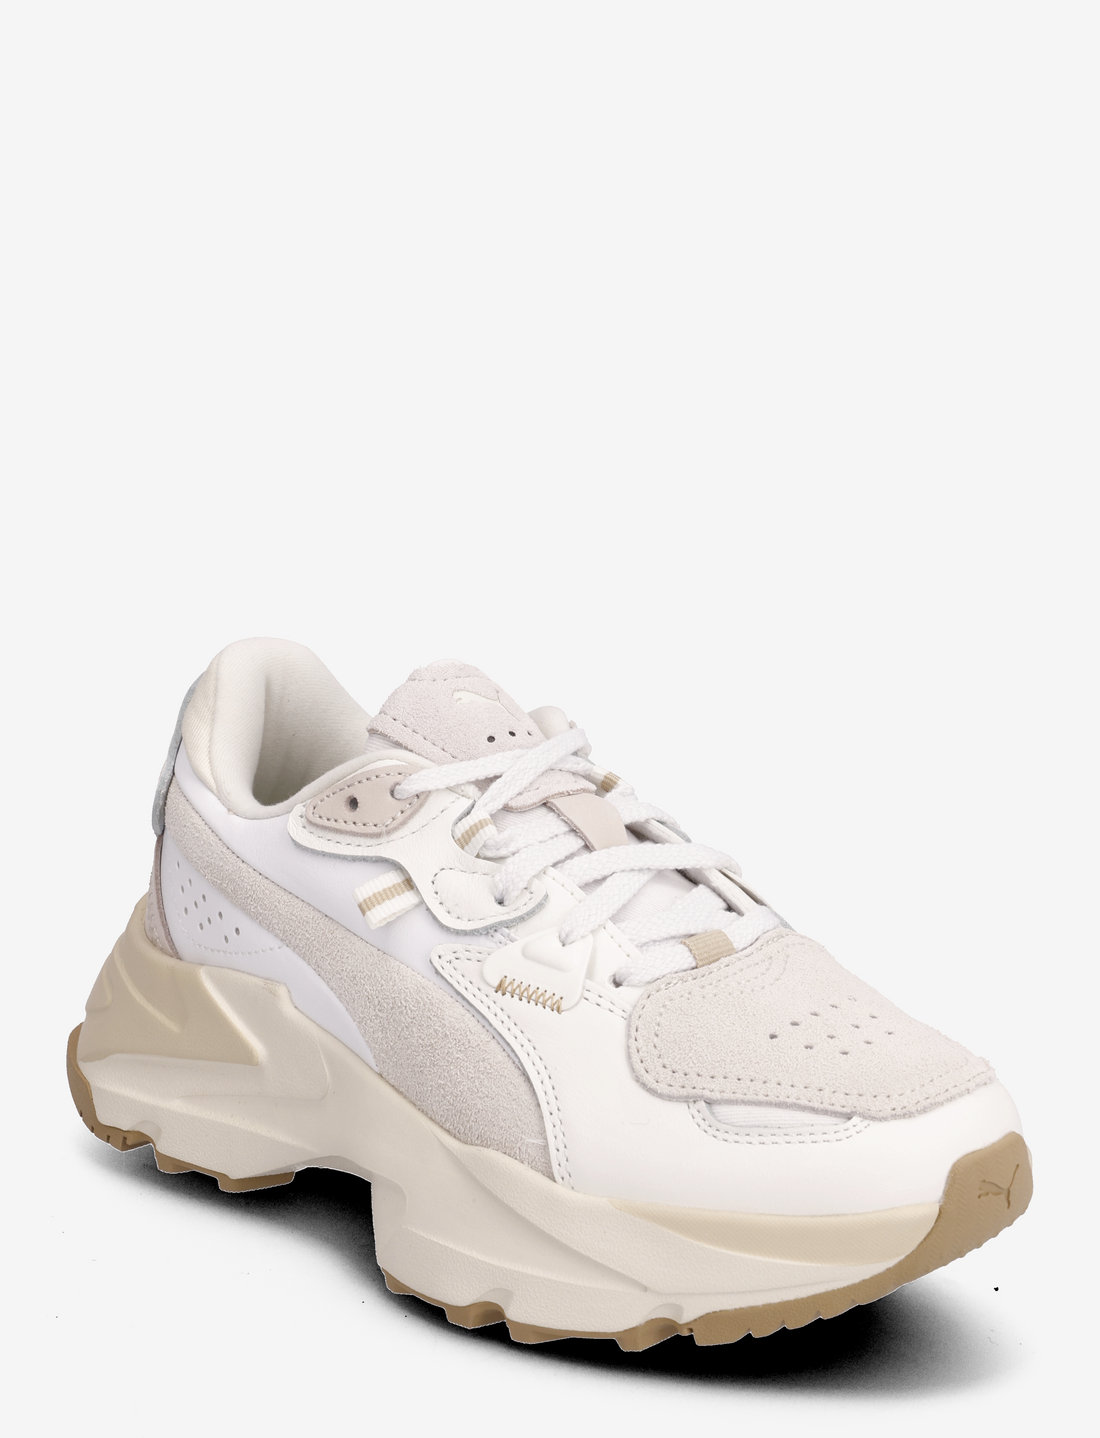 PUMA Orkid Selflove Wns - Low top sneakers | Boozt.com